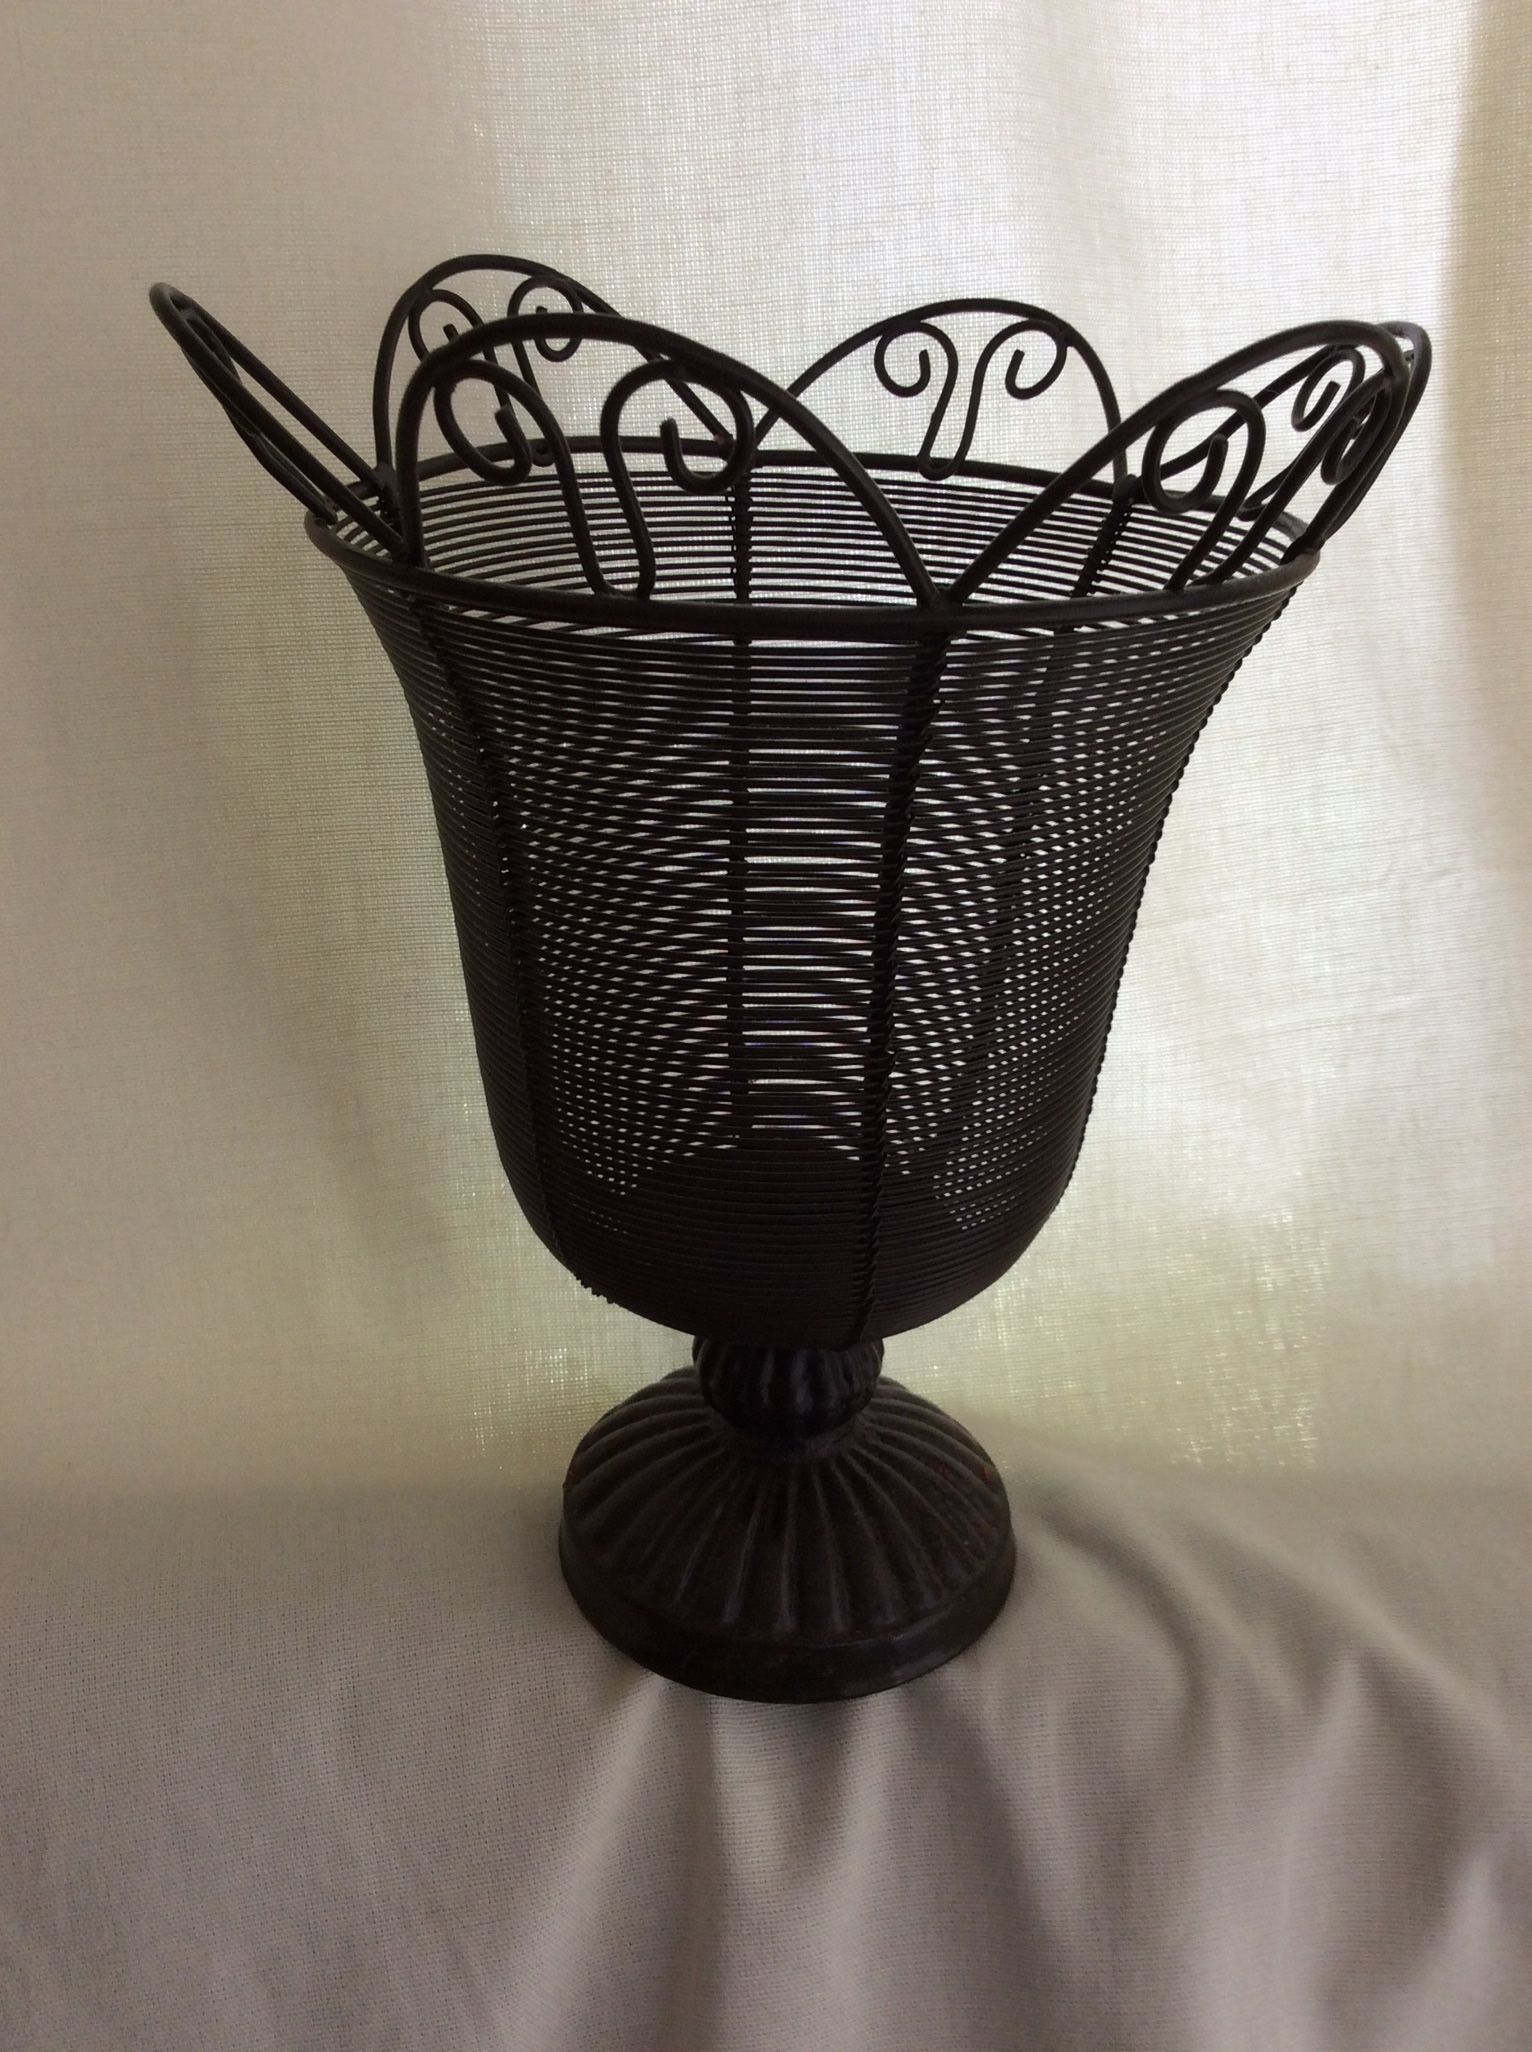 Wrought Iron Vase Can Hold Large Candle Or Silk Or Dried Greenery Or Flowers